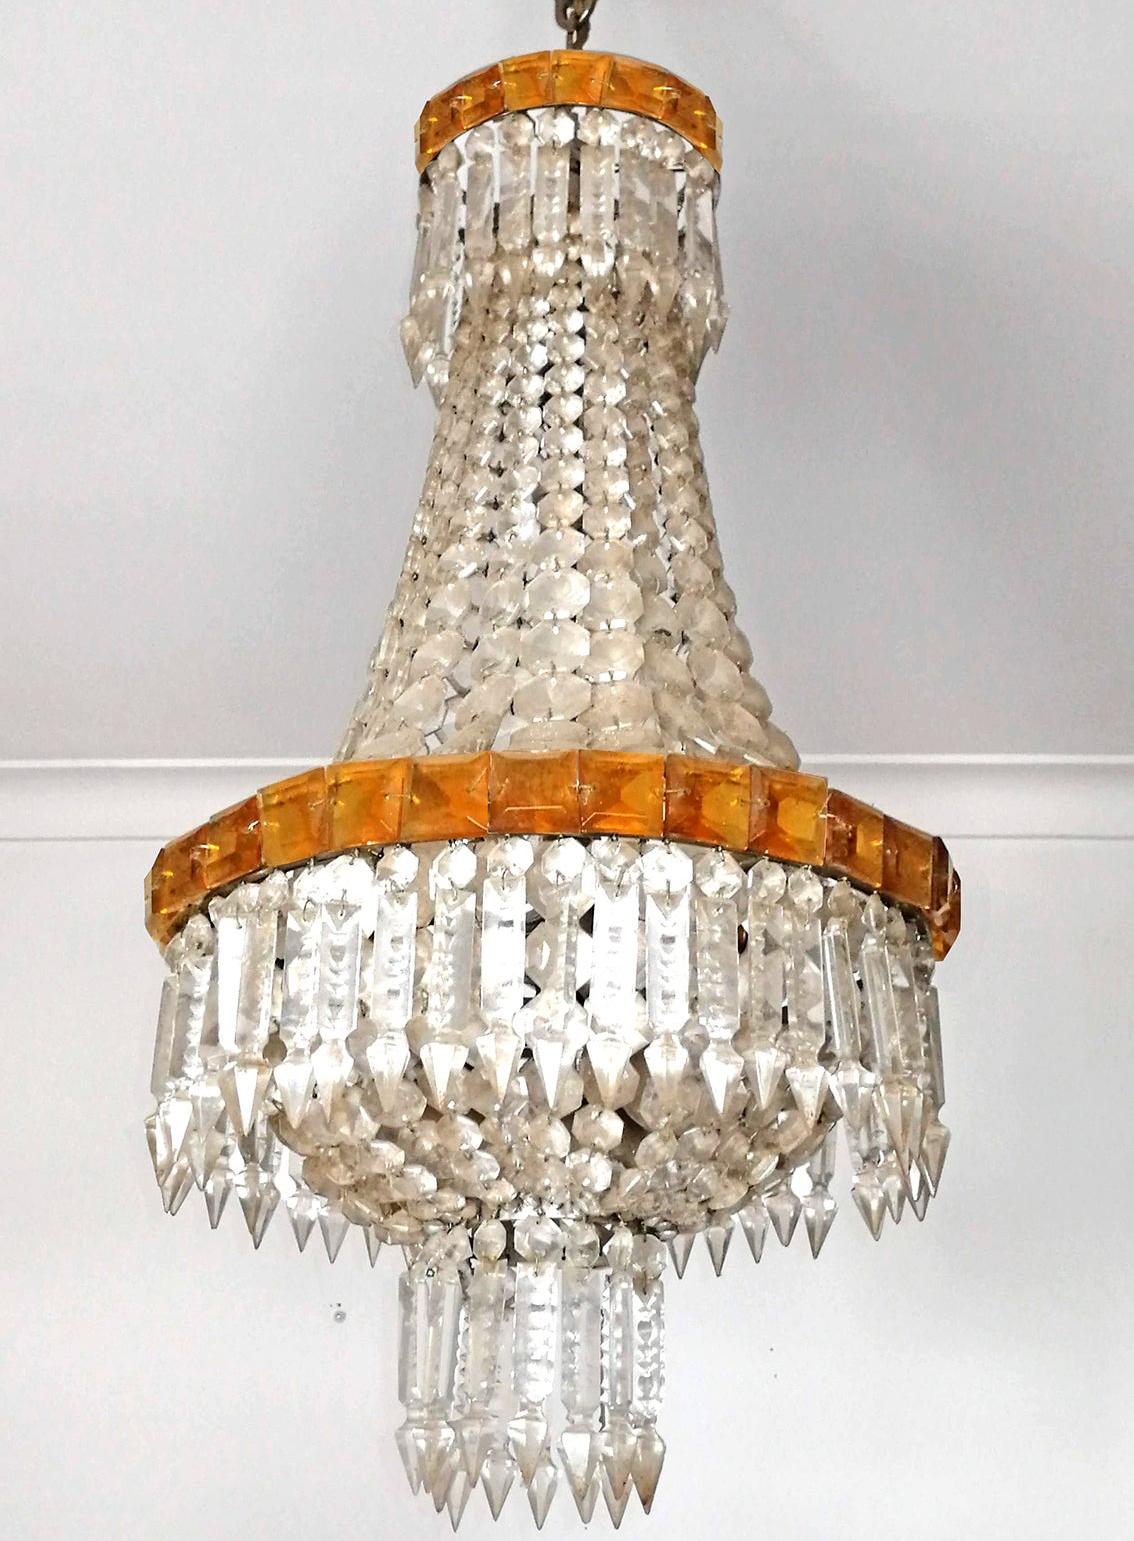 8-light French Empire amber crystal basket chandelier and chrome frame.
Measures:
Diameter 14.17 in/ 36 cm
Height 33.85 in( 2 in chain) / 86 cm (5 cm chain)
Weight: 26.5 lb/ 12 Kg
8 light bulbs E14, good working condition
Assembly required. Bulbs